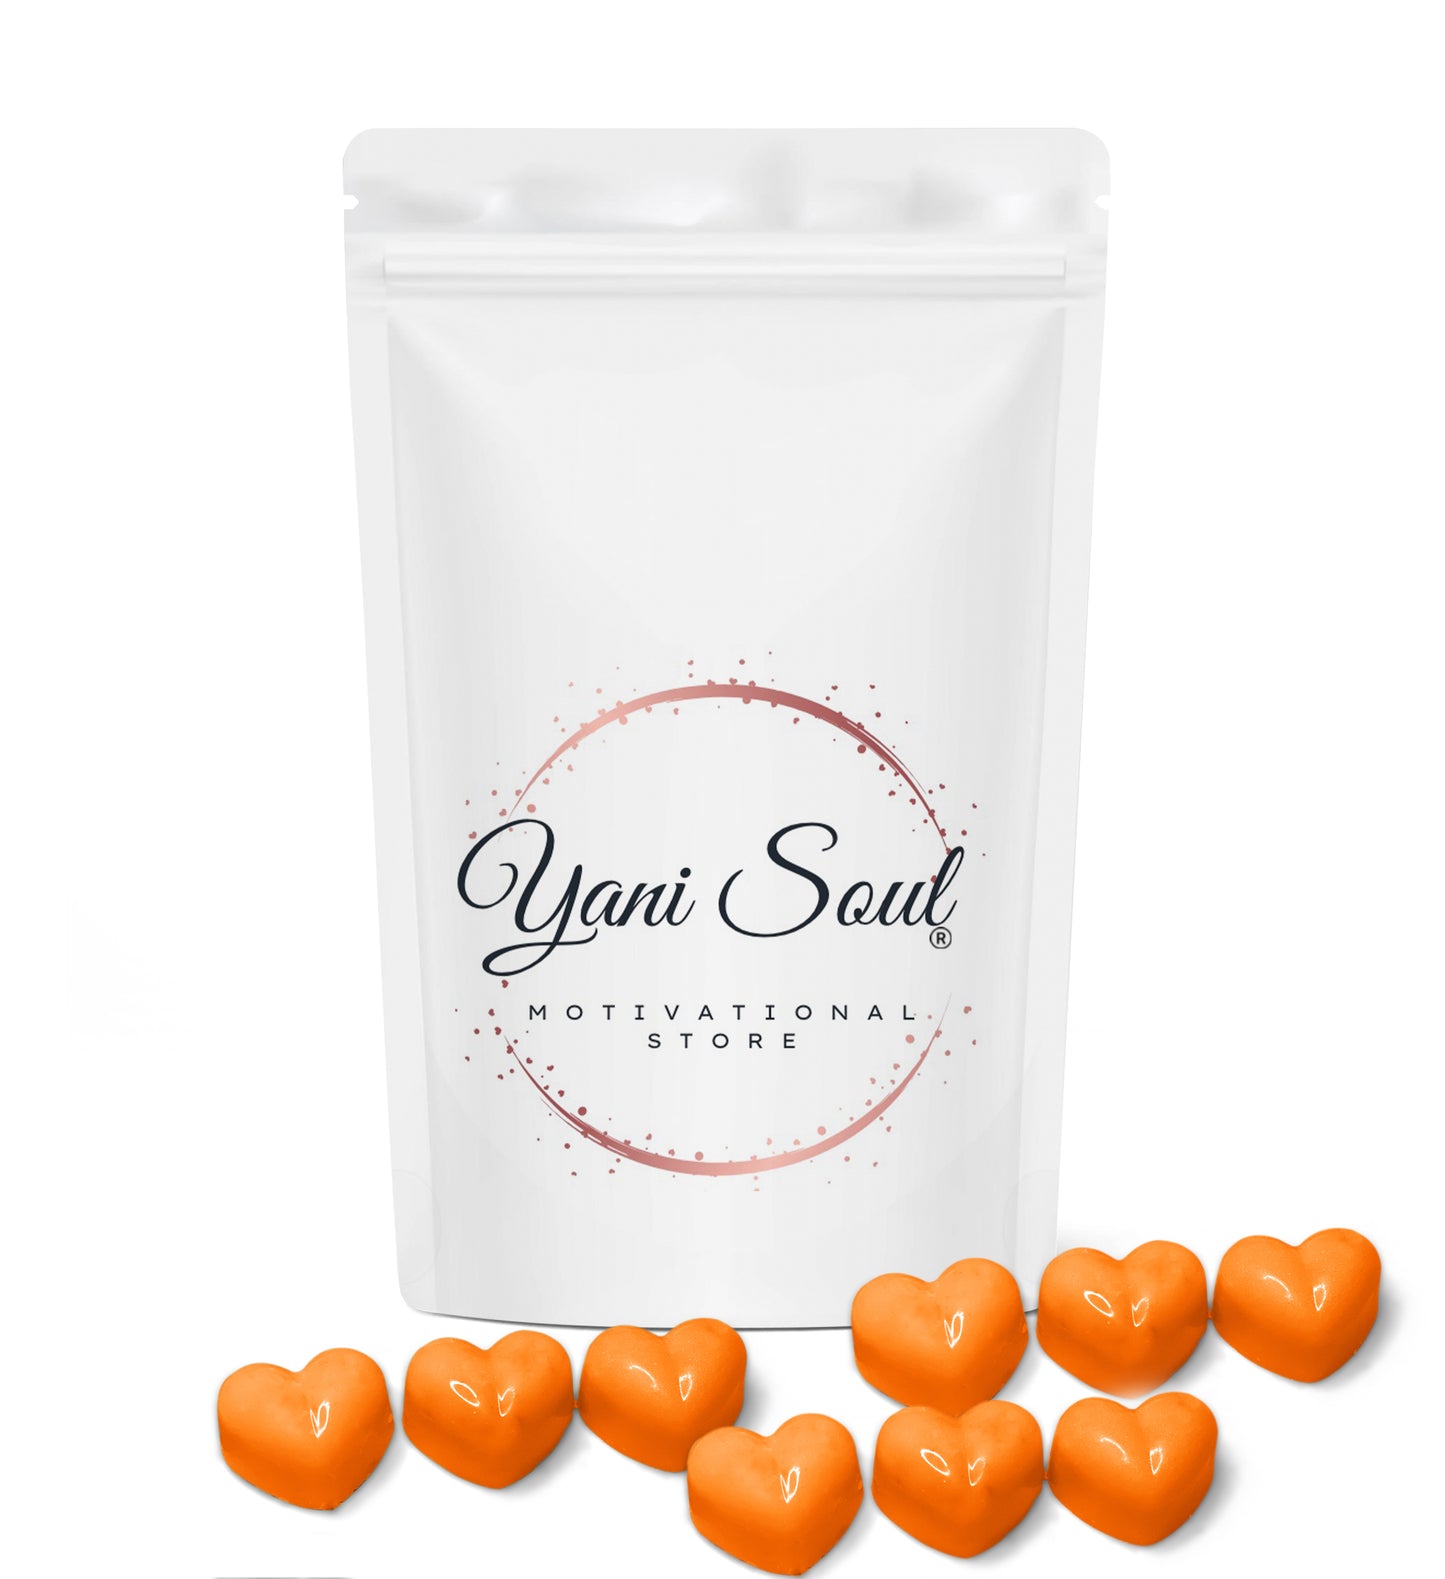 Scented Natural Soy Wax Melts – 8 Oz. of Scented Wax Melts.